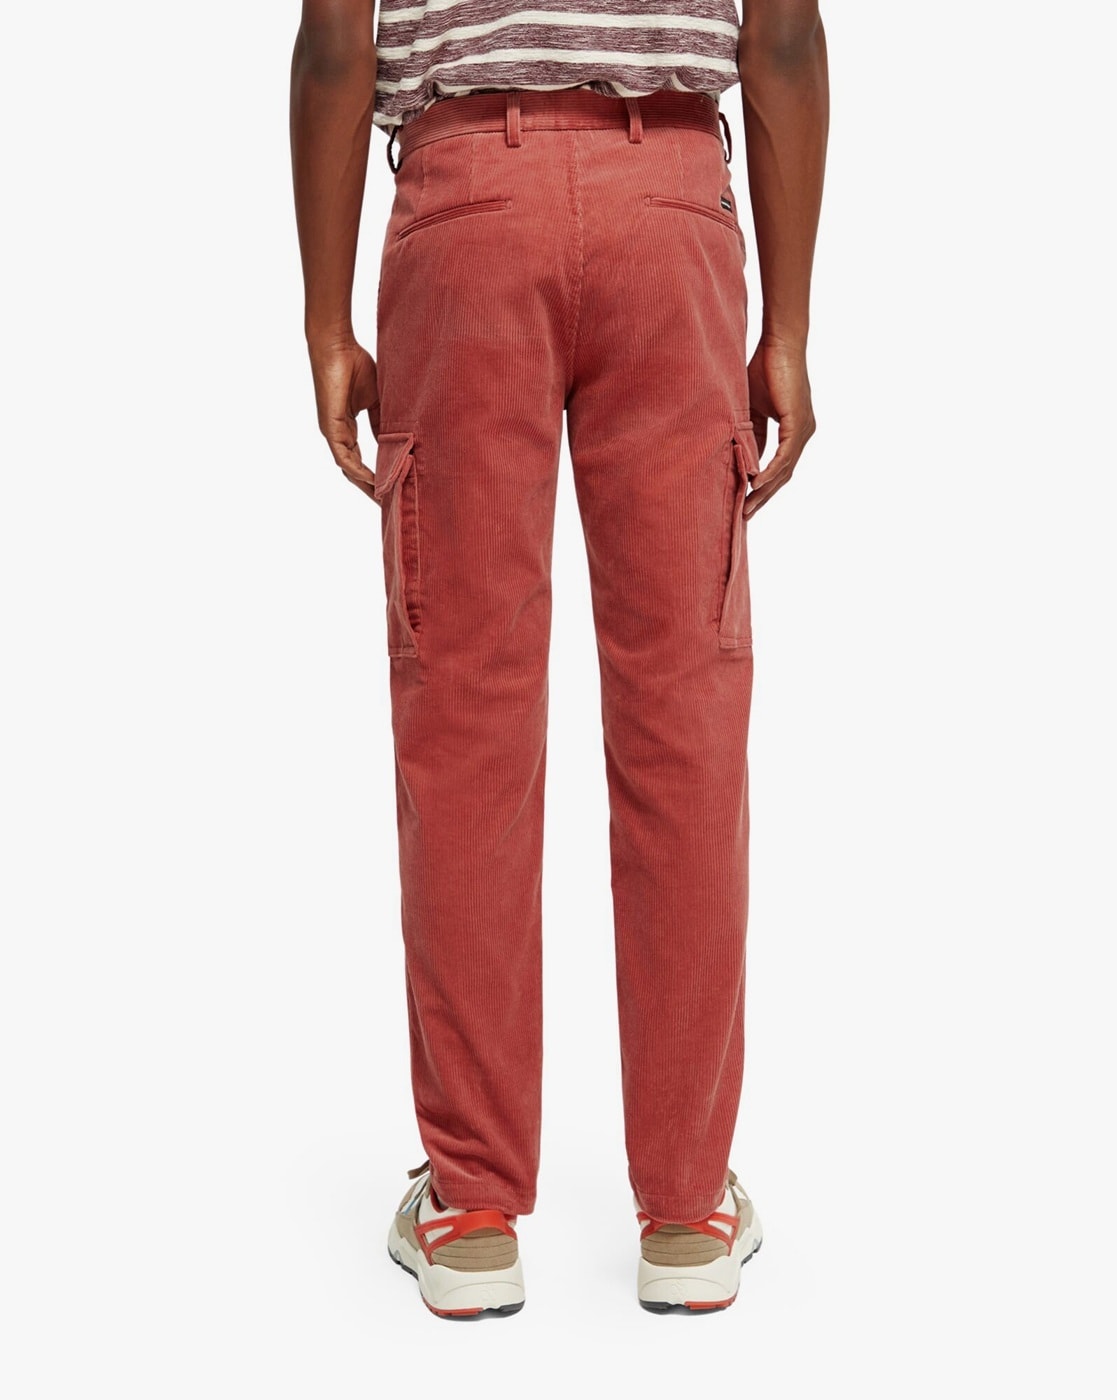 Corduroy Pants for Young Adult Men | Nordstrom